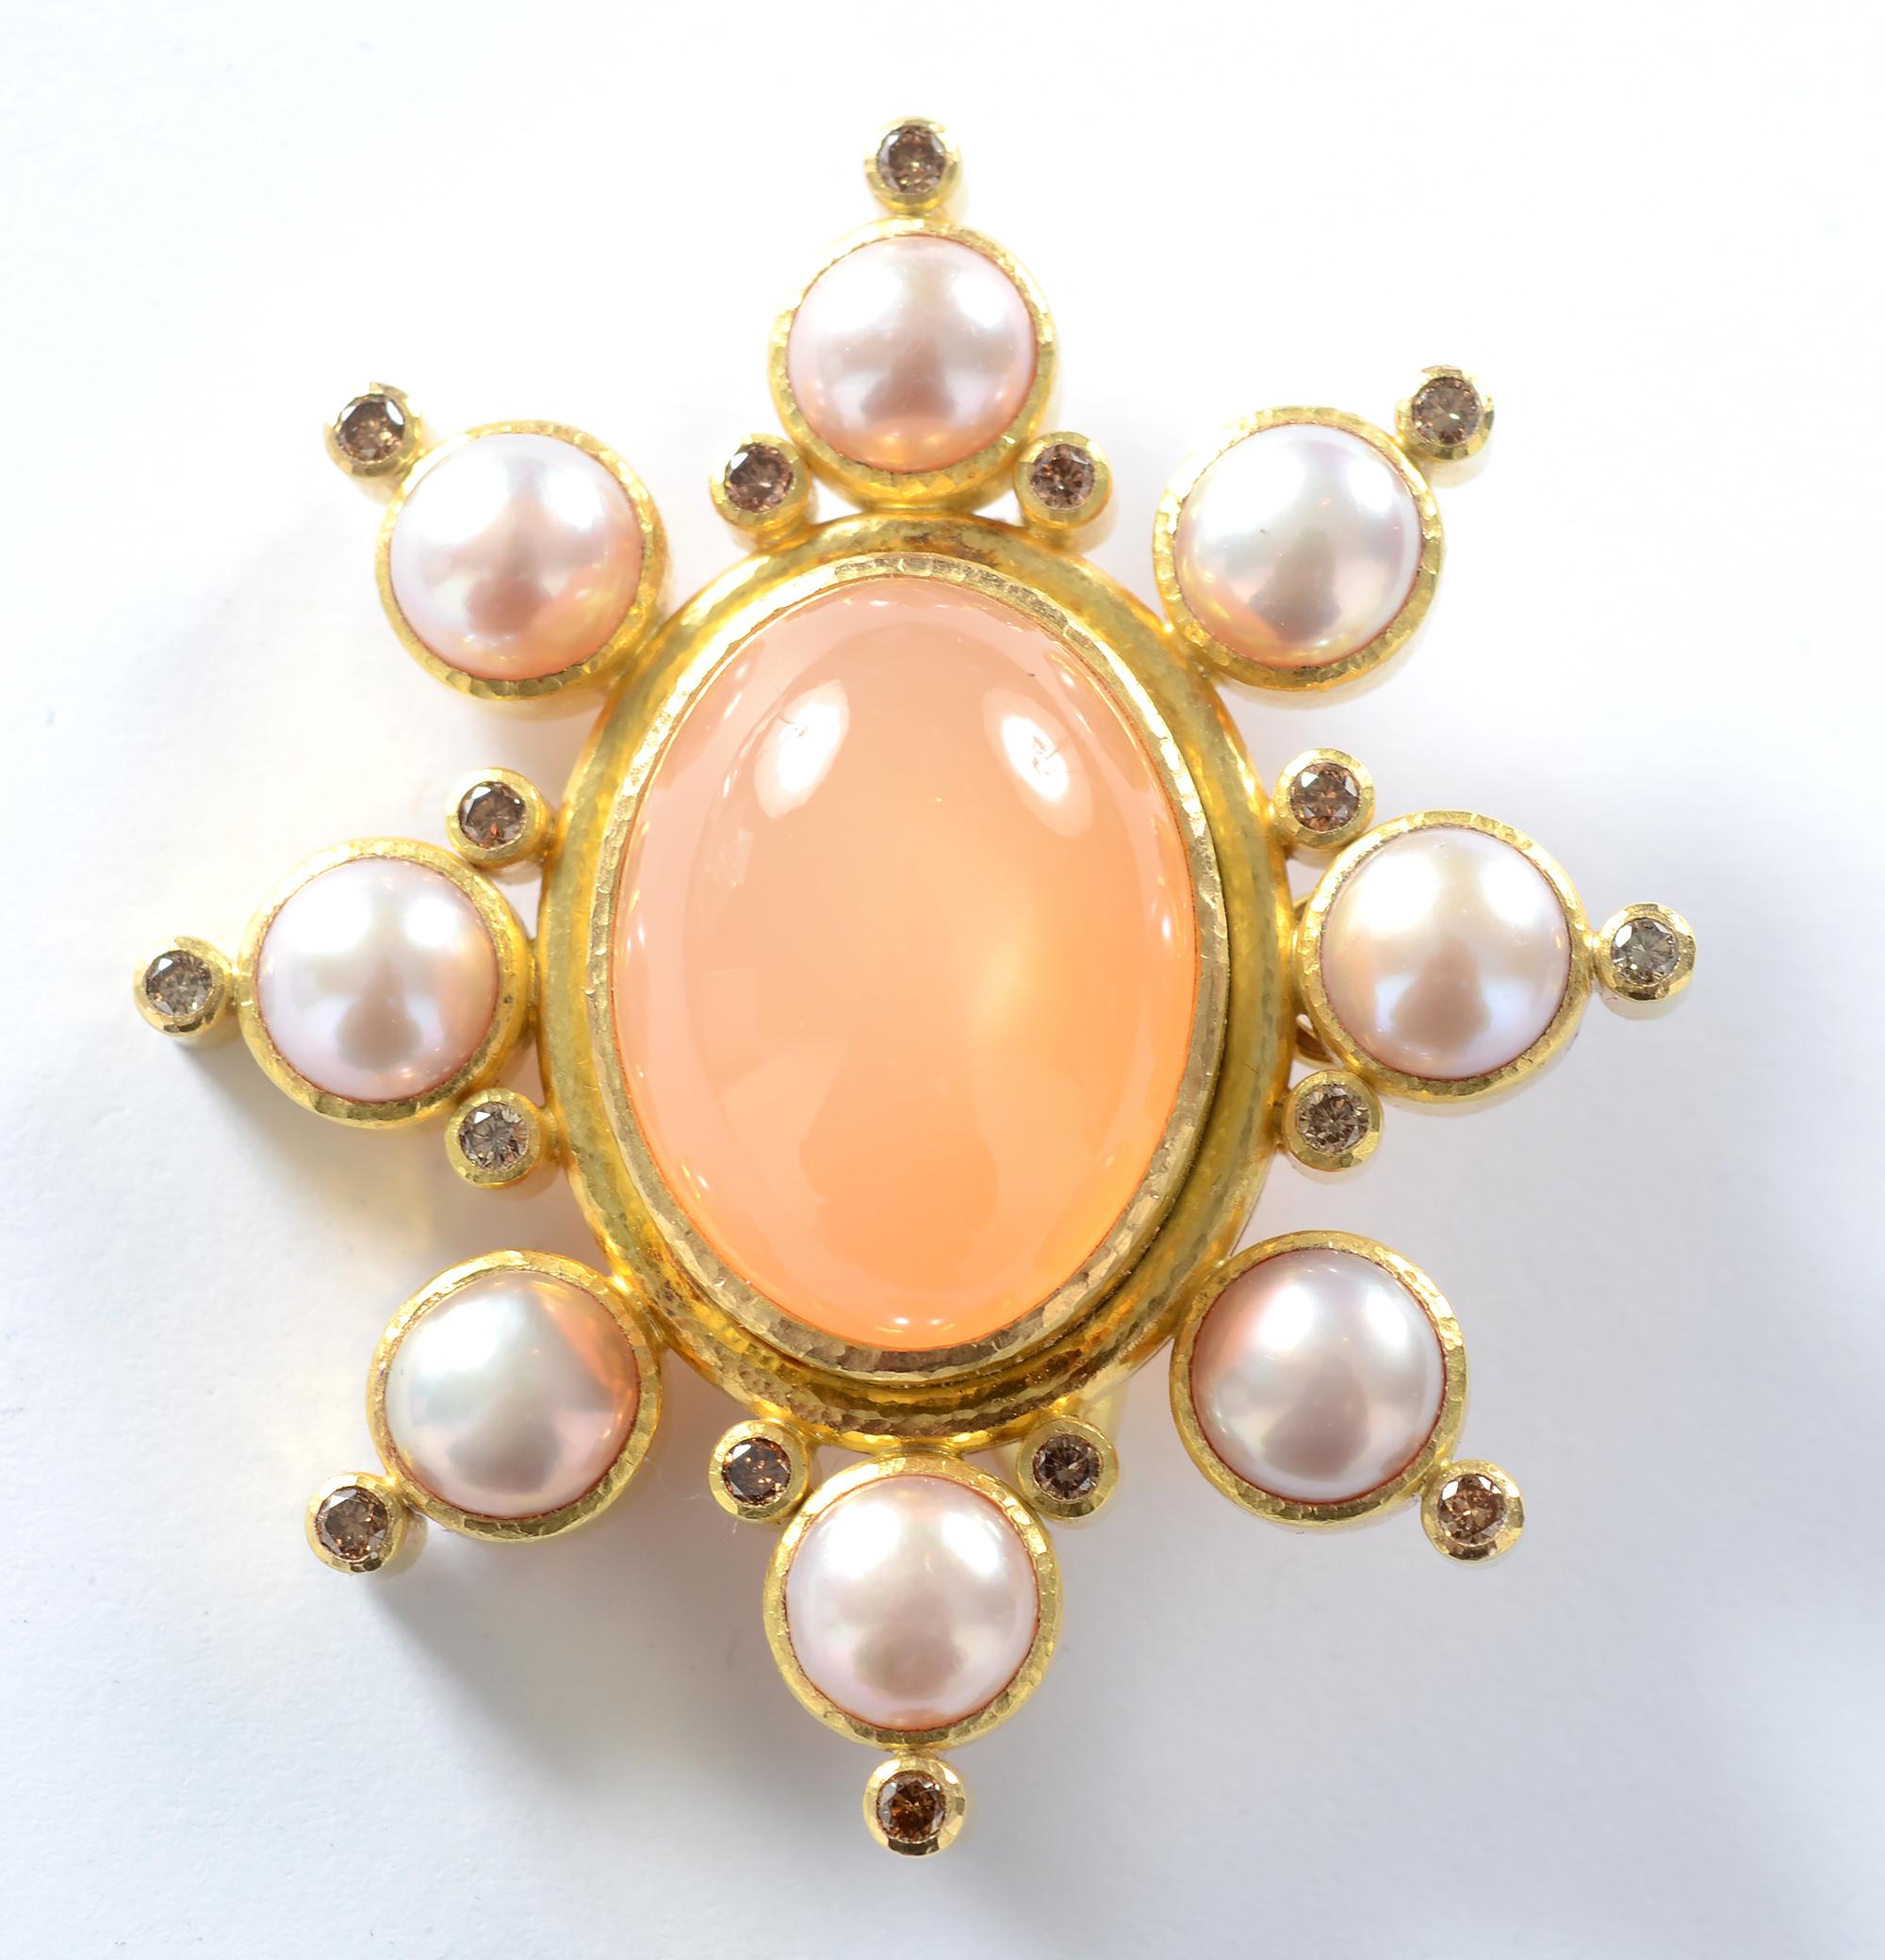 Softly toned brooch/ pendant by Elizabeth Locke with a large central peach colored moonstone. The stone measures 1 1/16